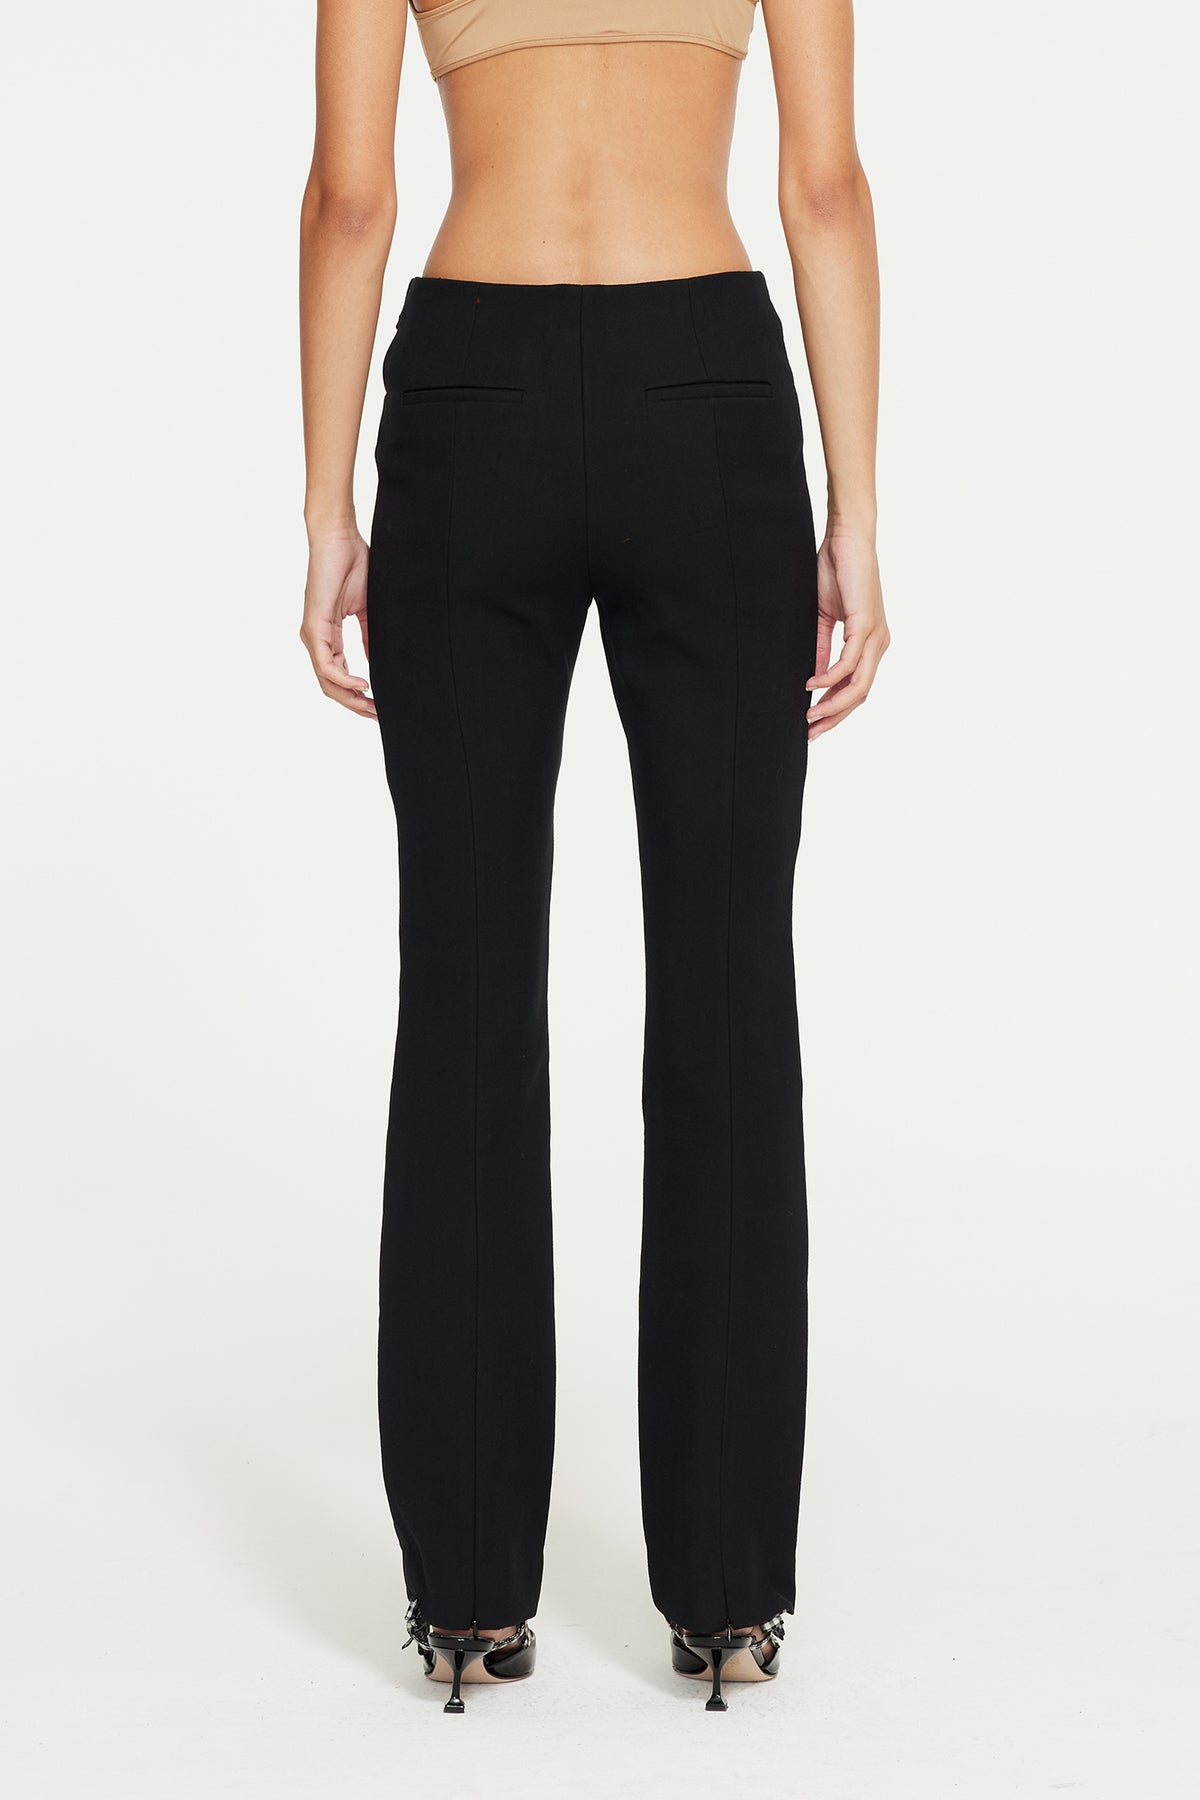 The Chief Pant By GINIA In Black